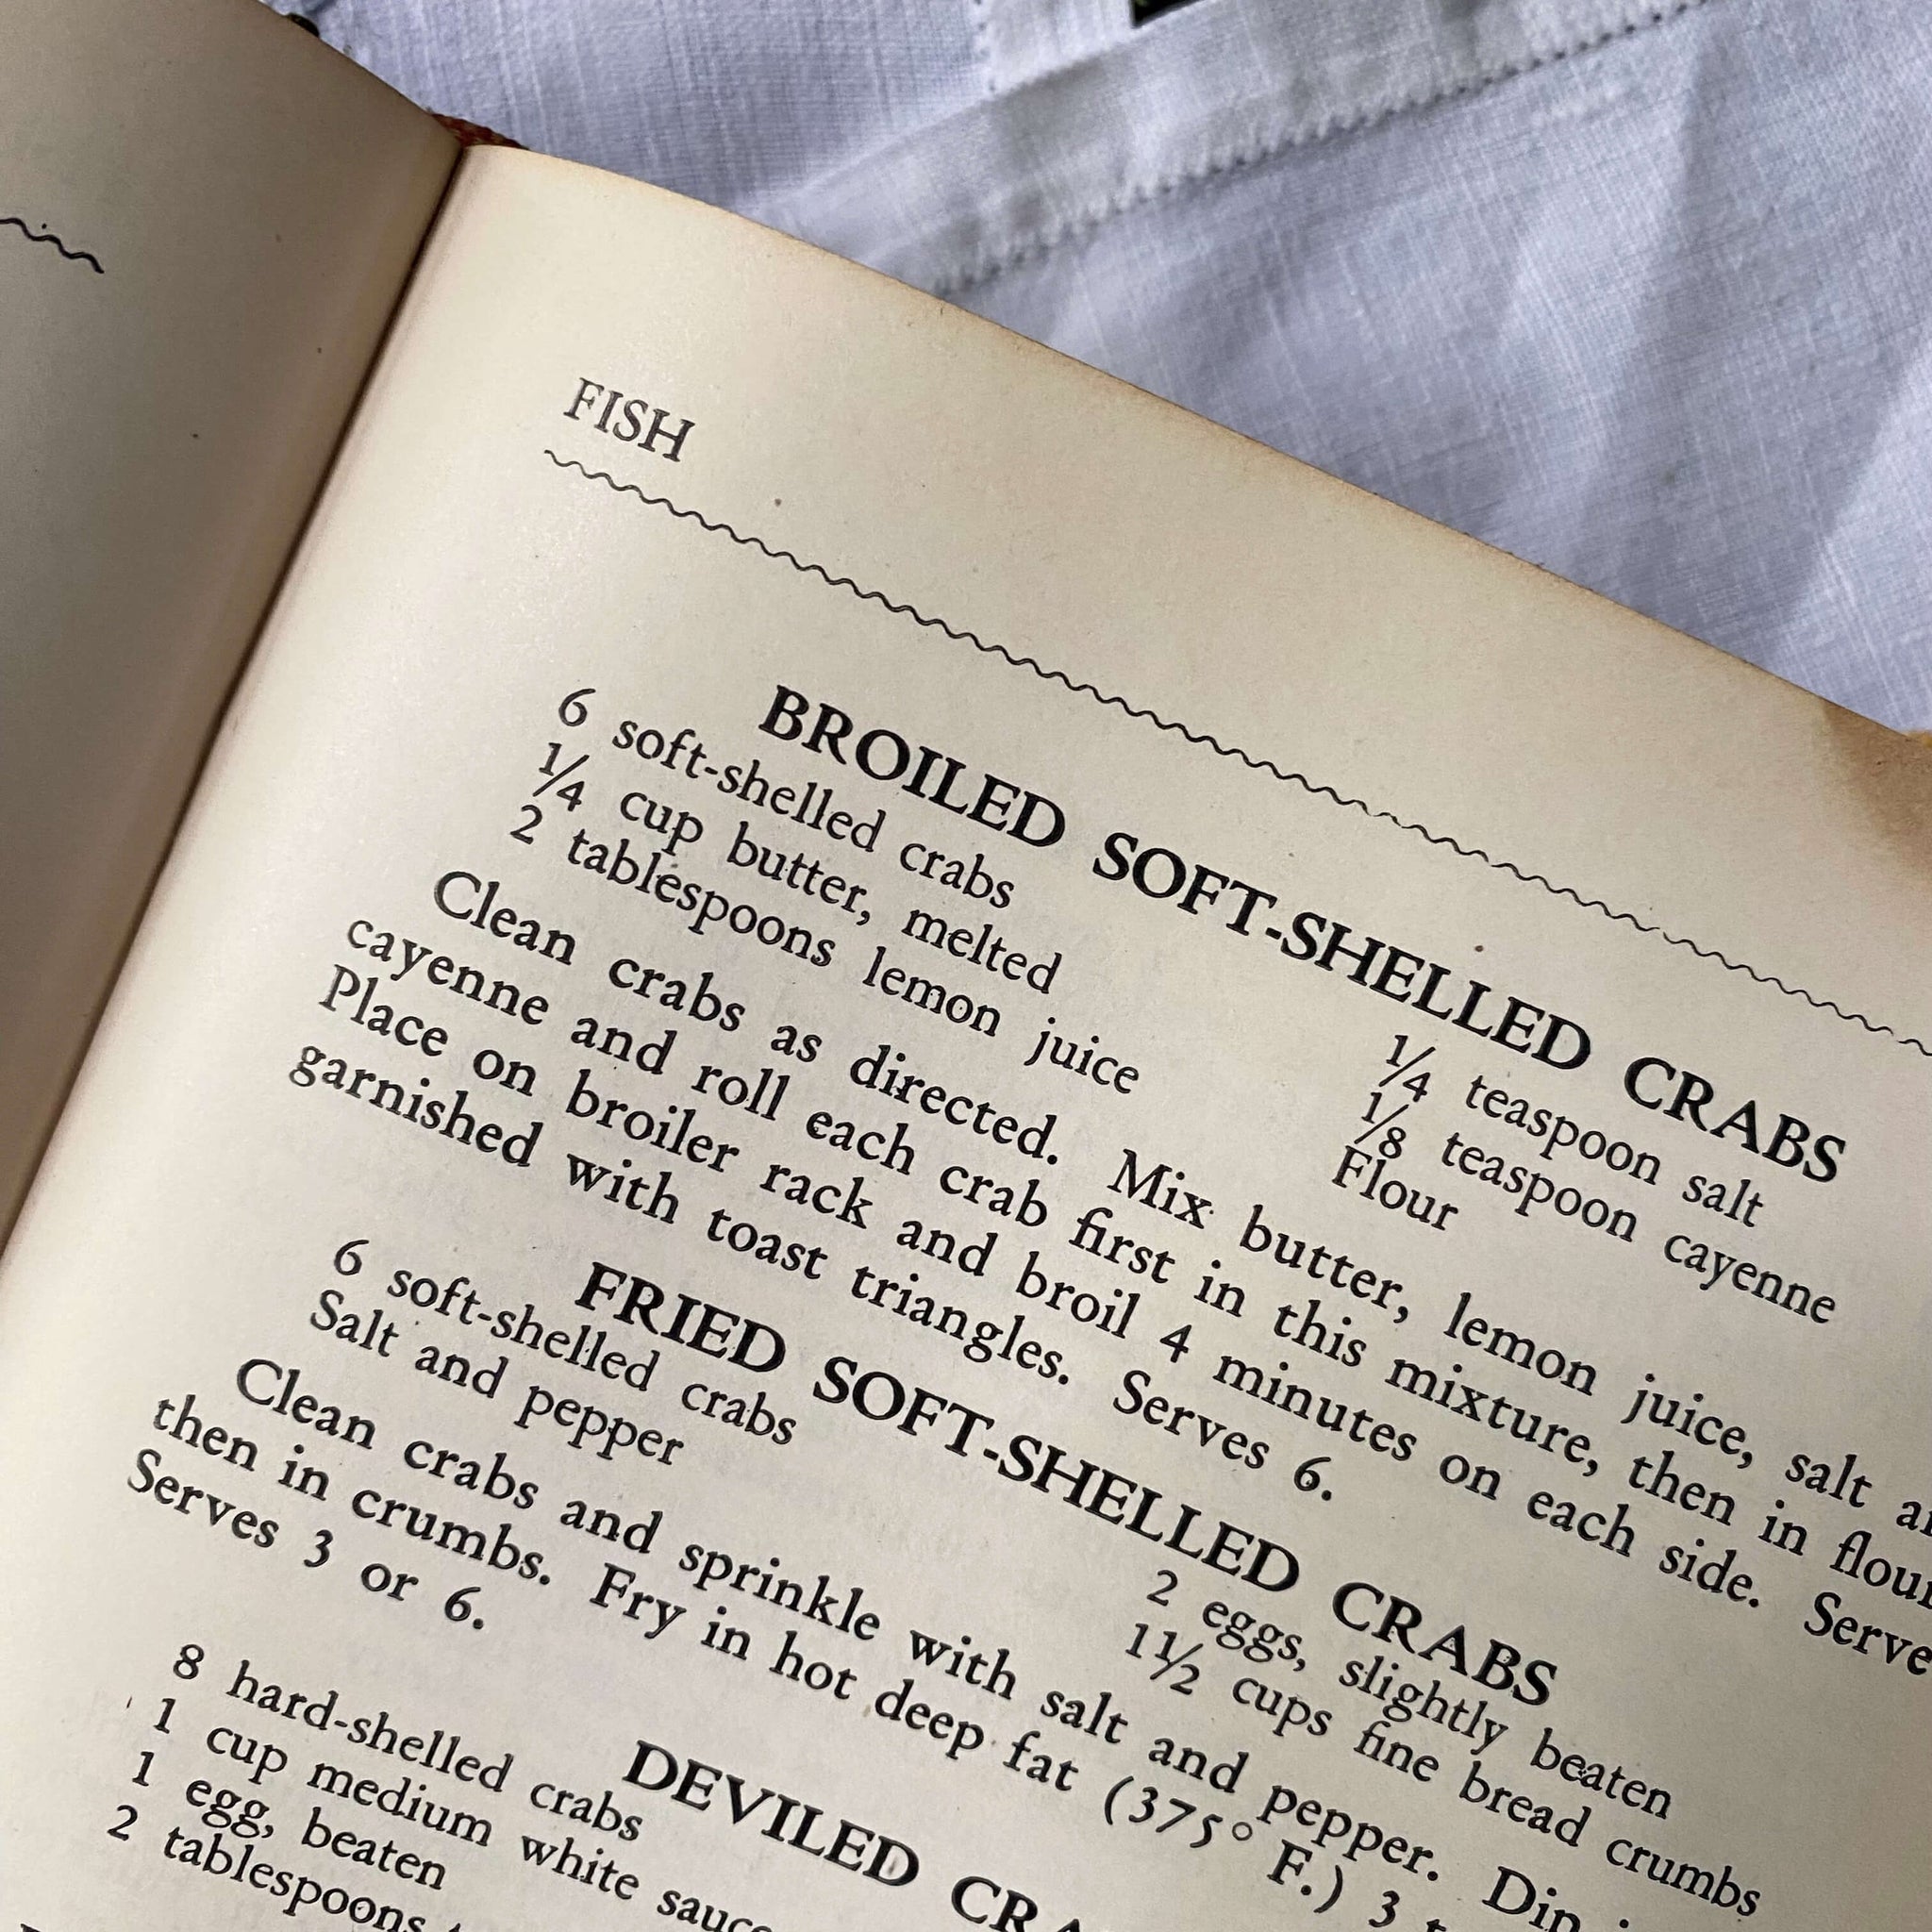 The American Woman's Cook Book - 1947 Edition